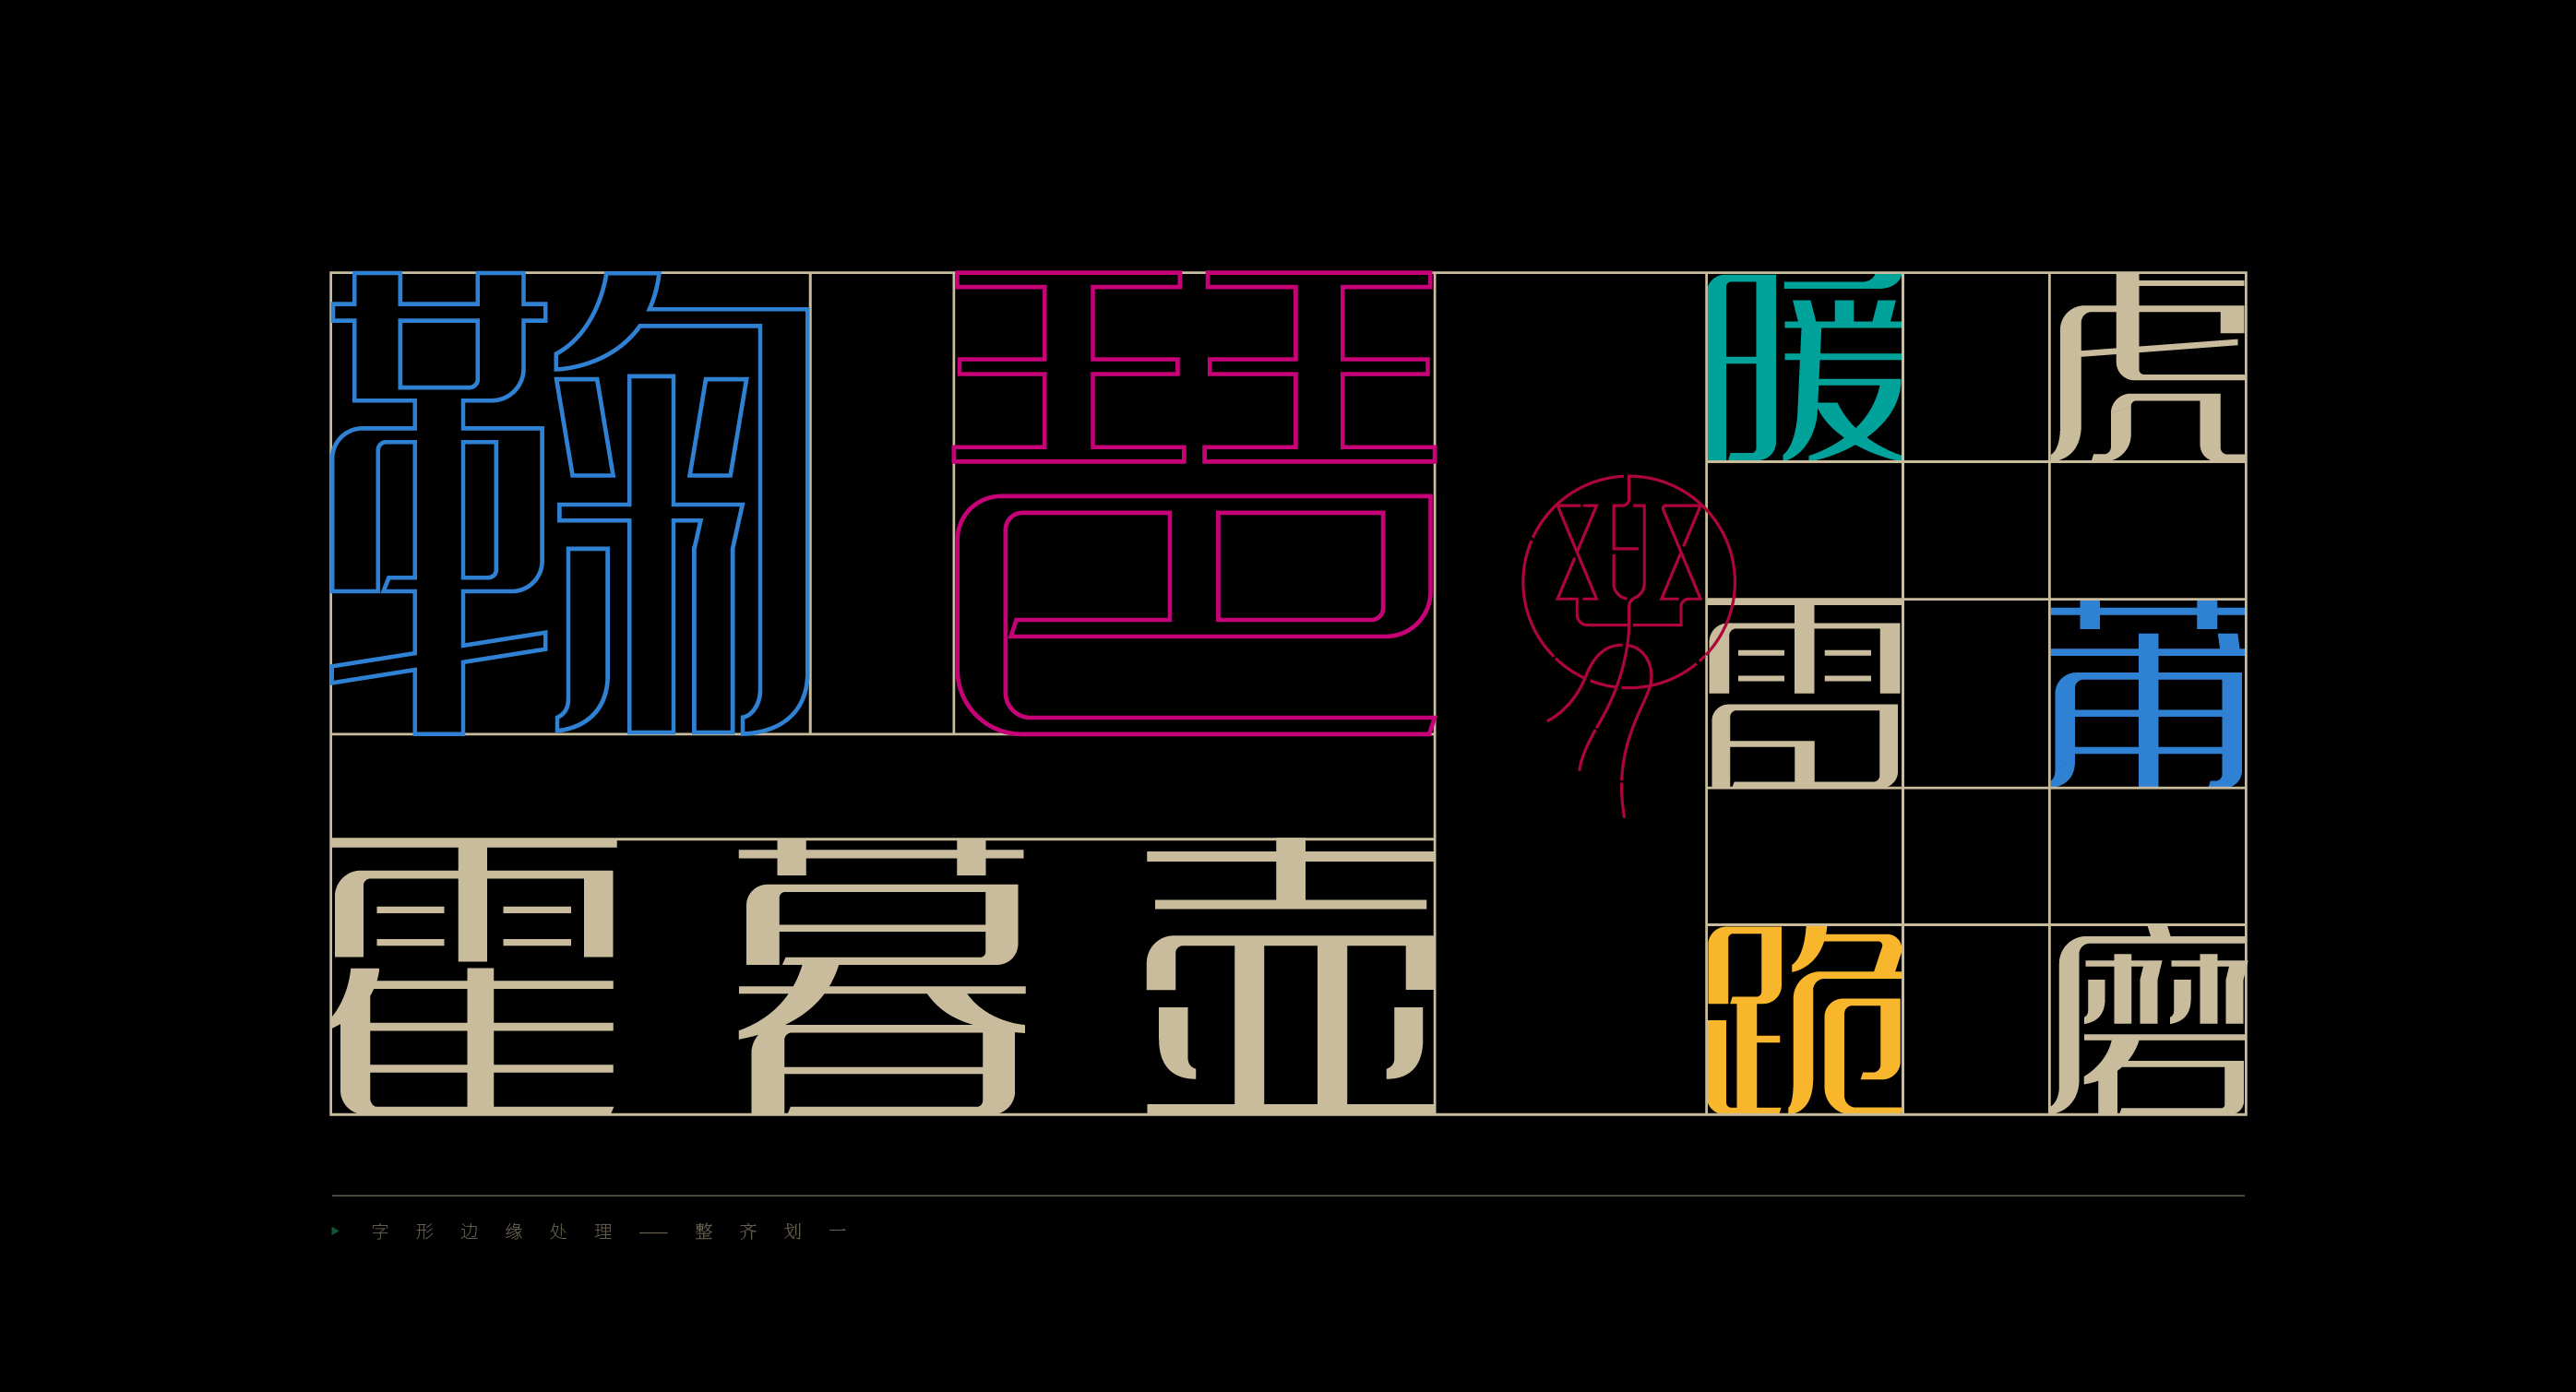 38P Collection of the latest Chinese font design schemes in 2021 #.11